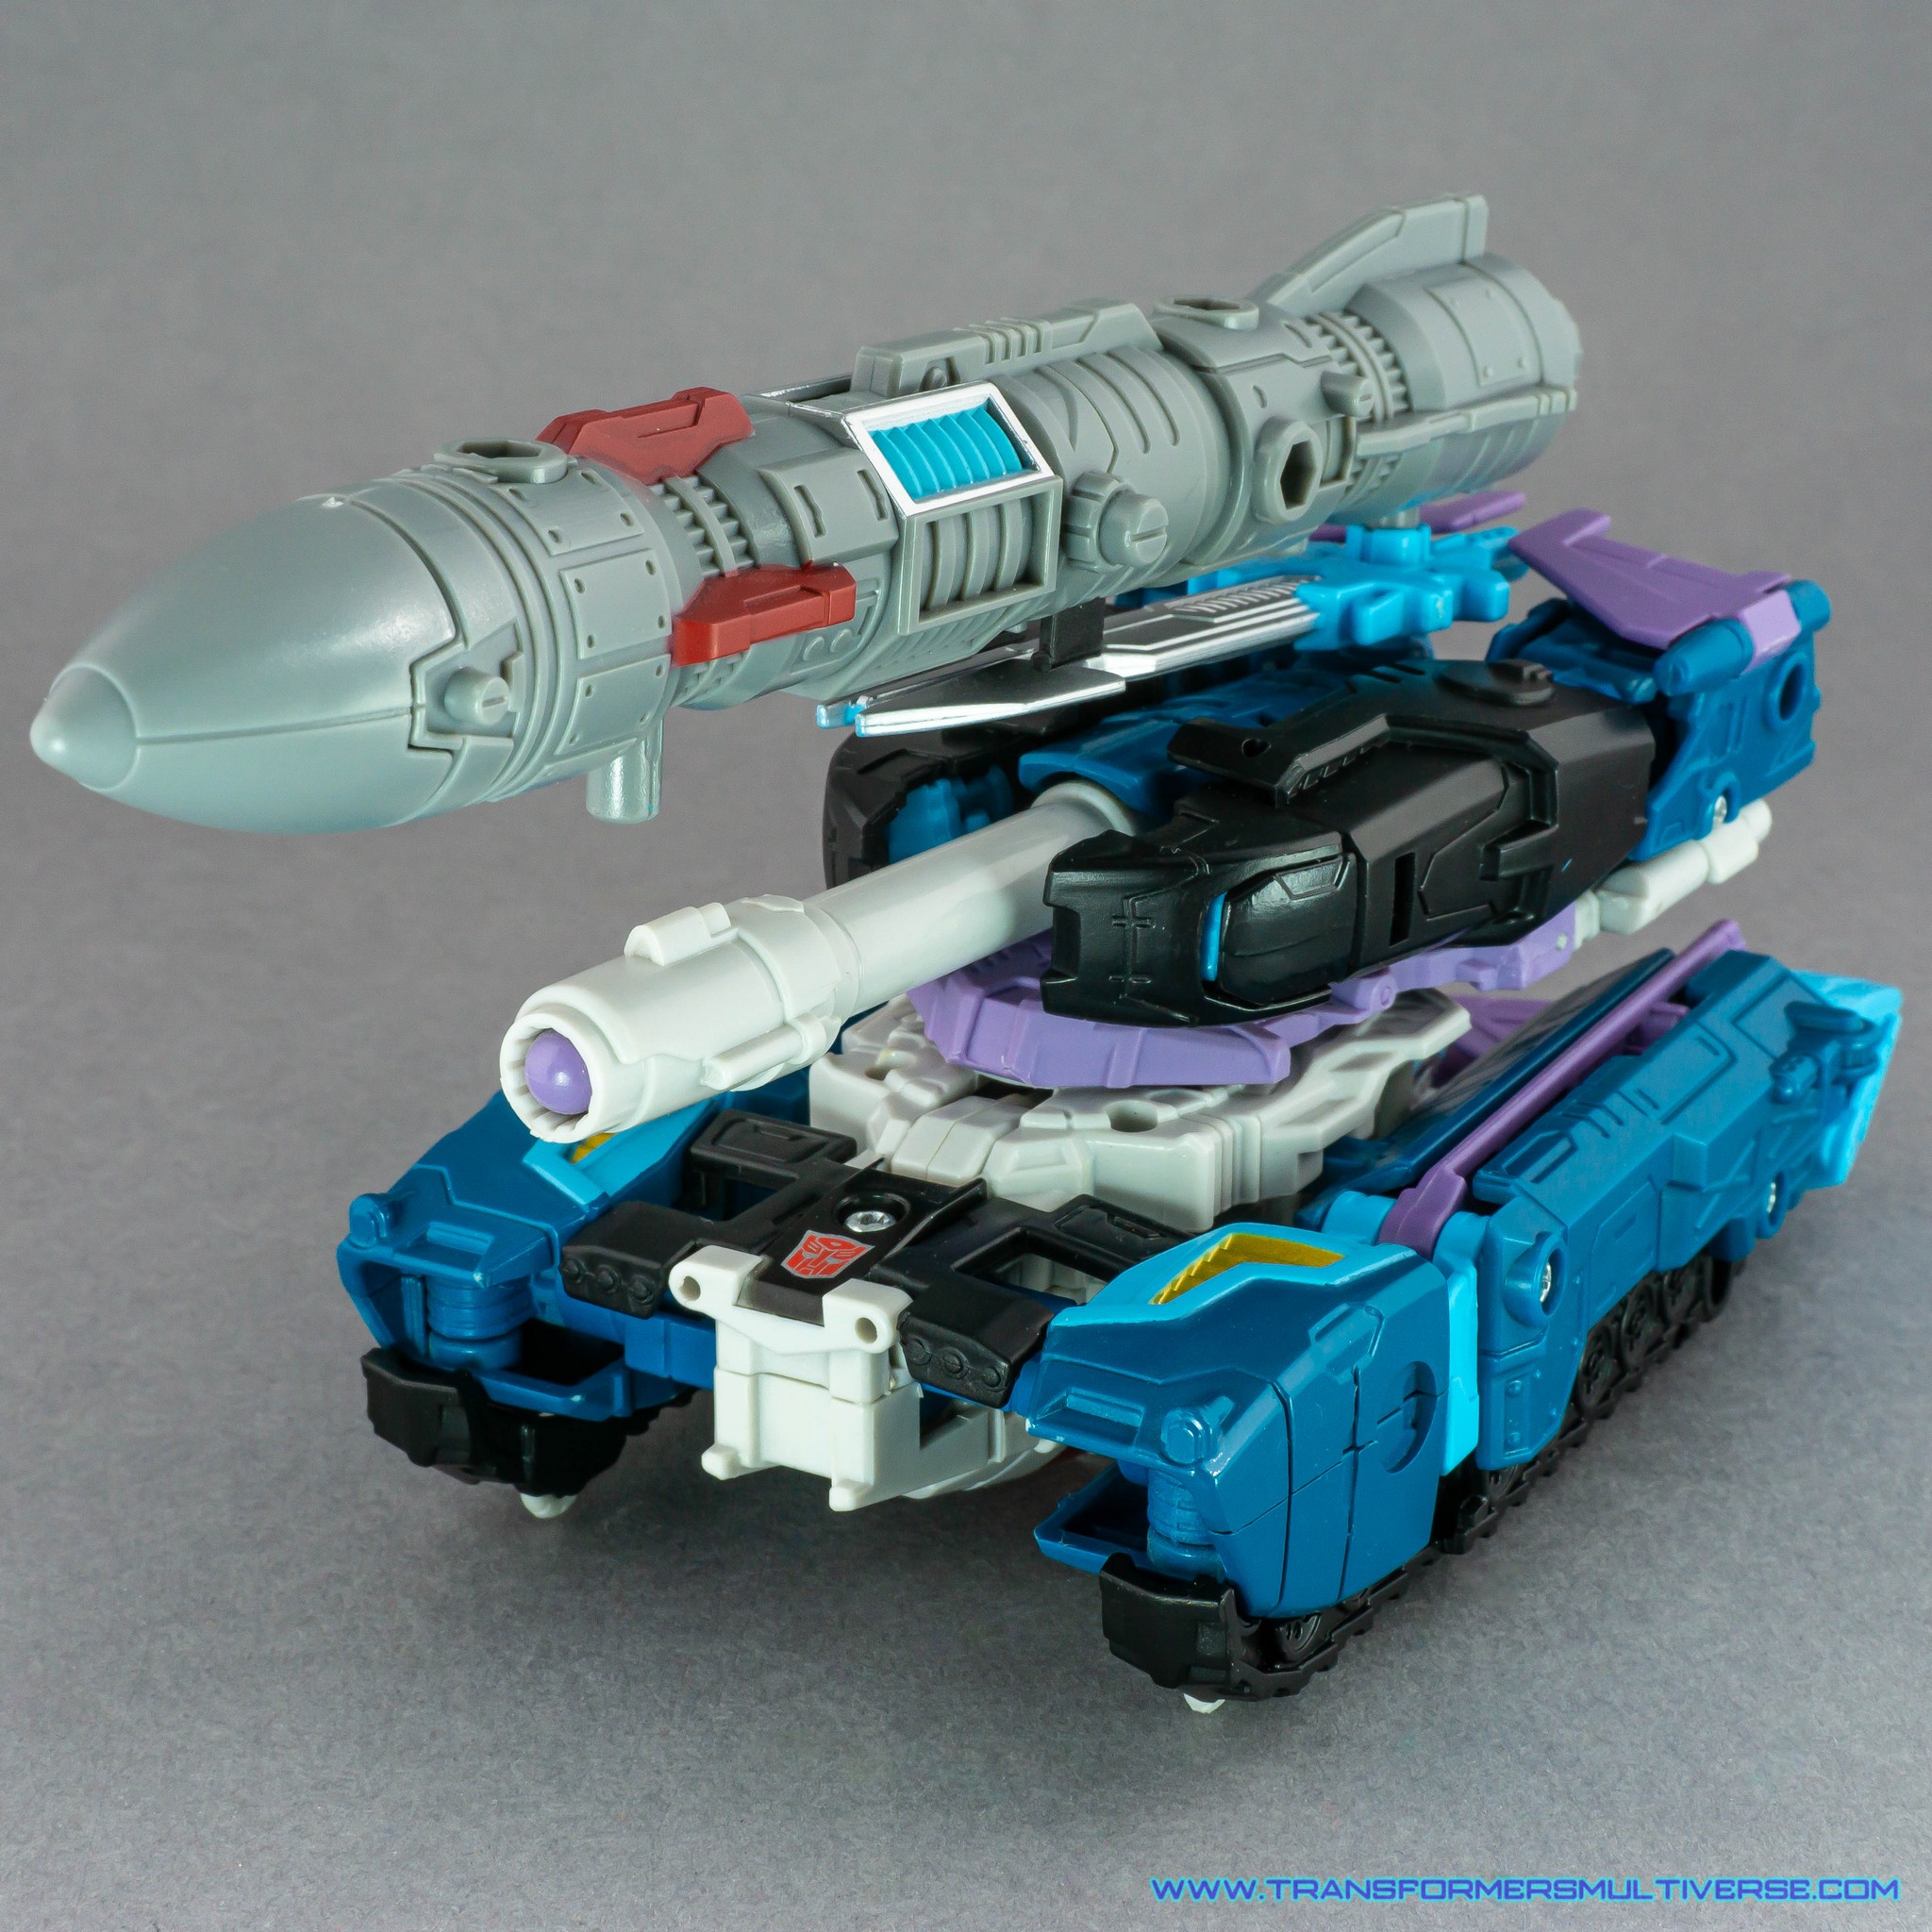 Transformers Generations Doubledealer Tank mode with Earthrise weapons